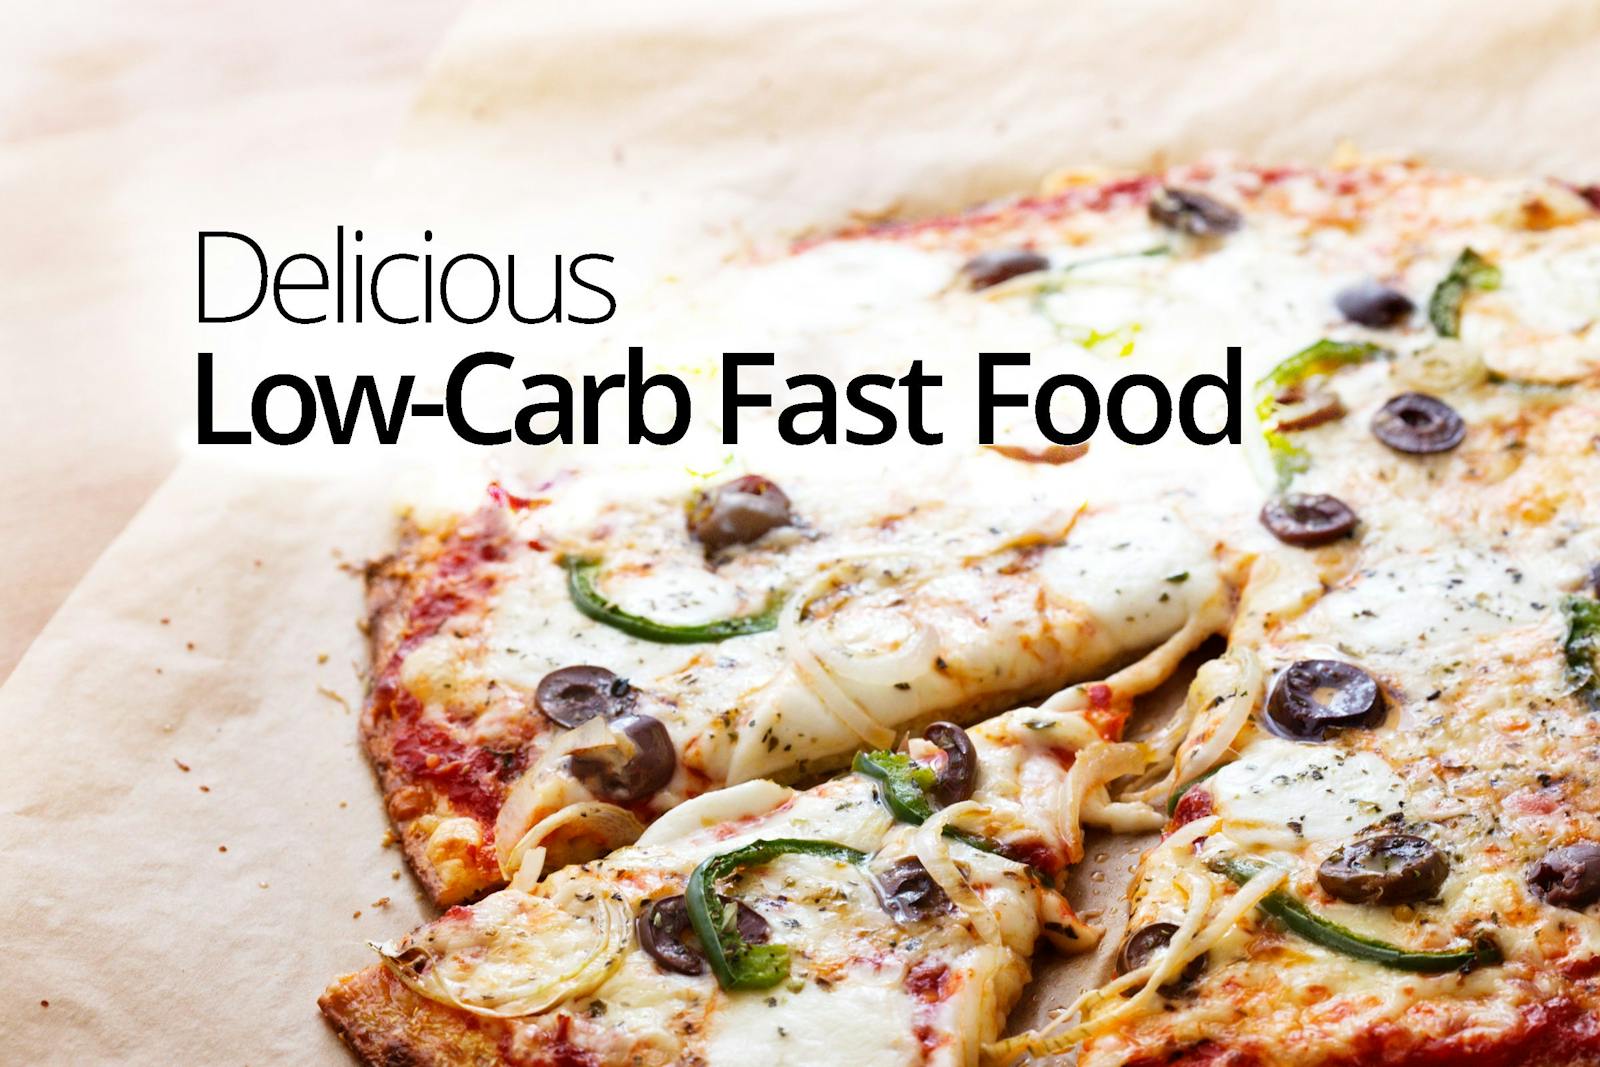 Low-Carb Fast Food